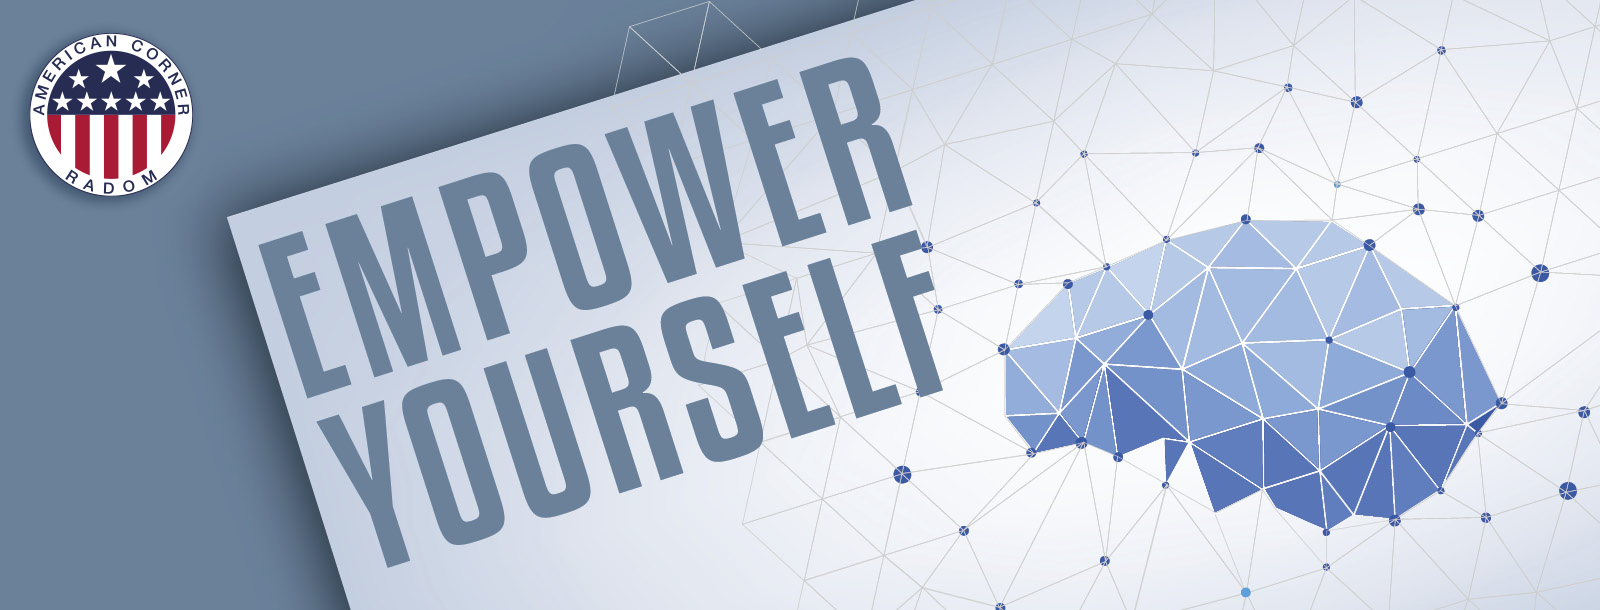 EMPOWER YOURSELF - CULTURE POWER!